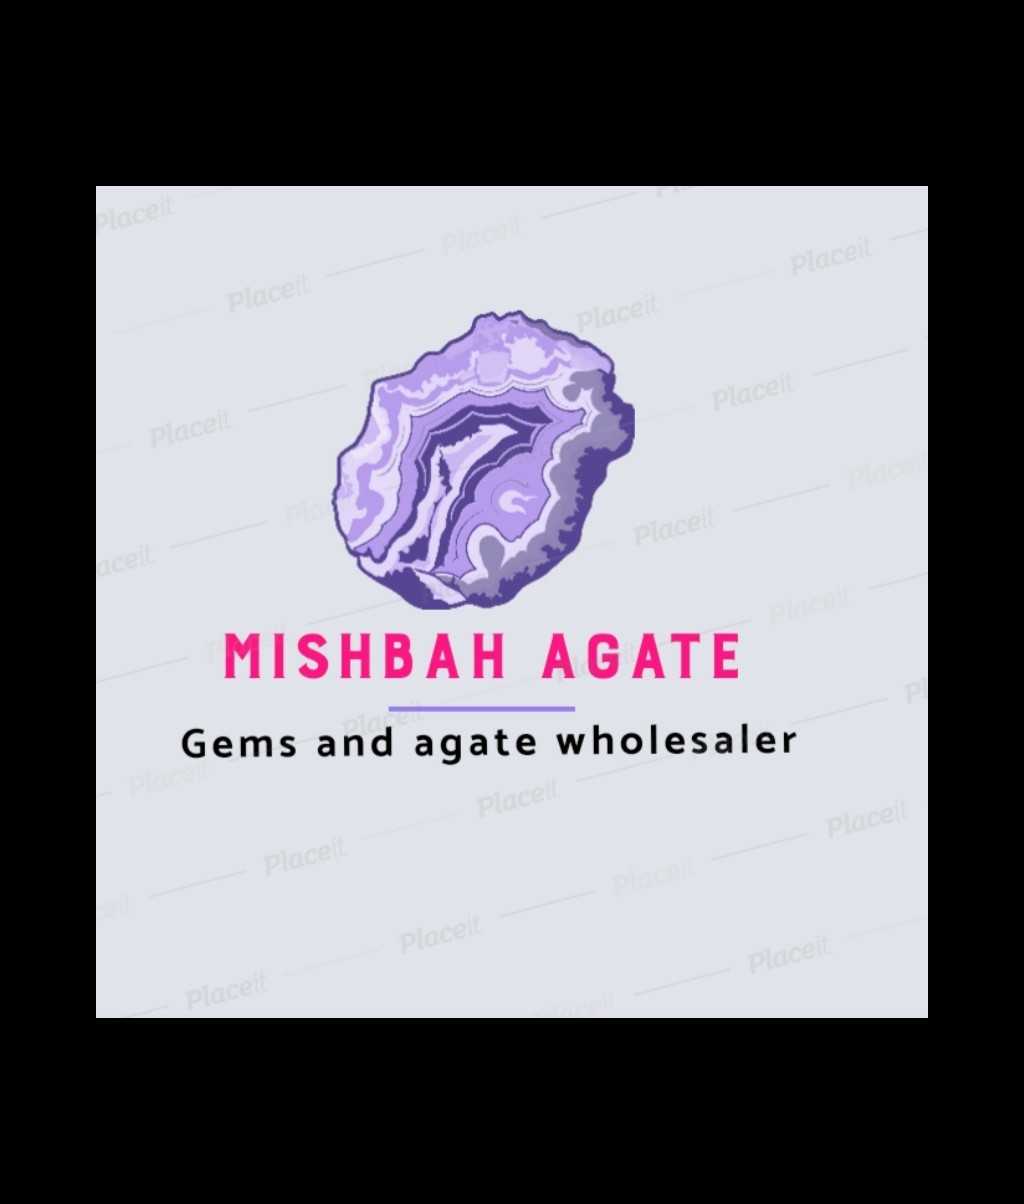 MISHBAH GARLIC <P> Note: The subject's name was changed from "MISHBAH GARLIC" to "MISHBAH AGATE